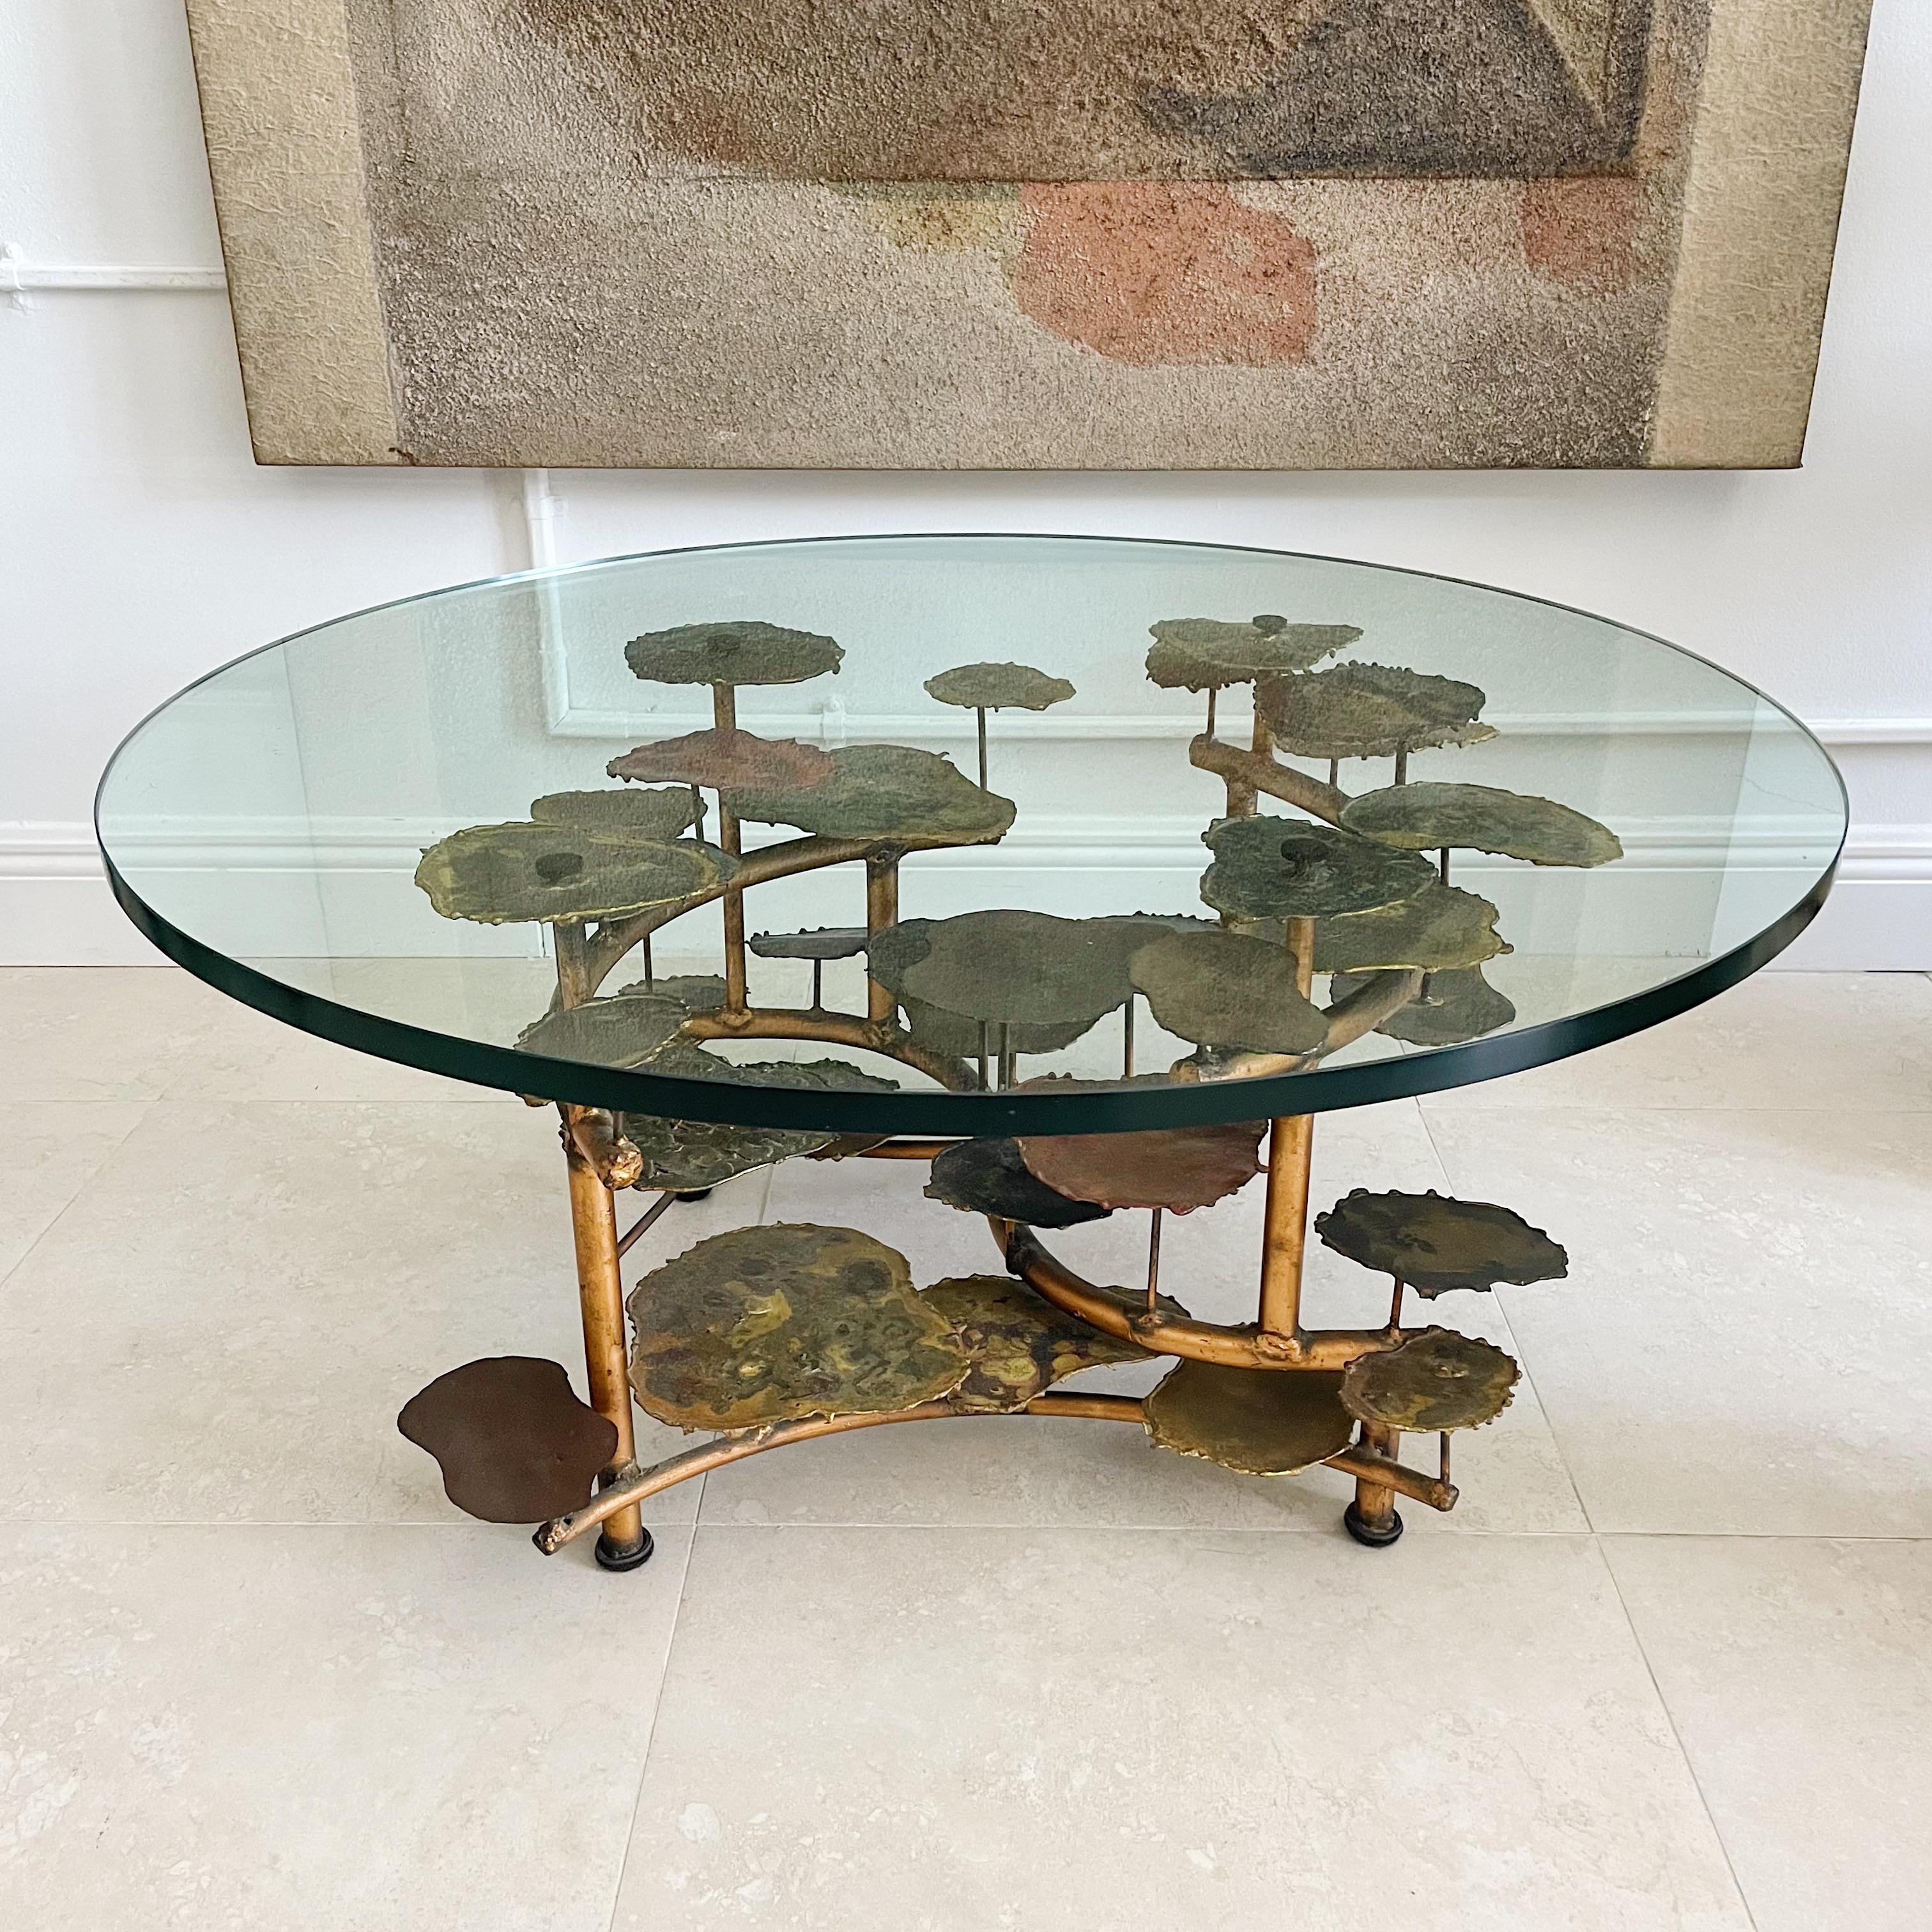 Hand-Crafted Silas Seandal Lily Pad Mixed Metal Vintage Coffee Table